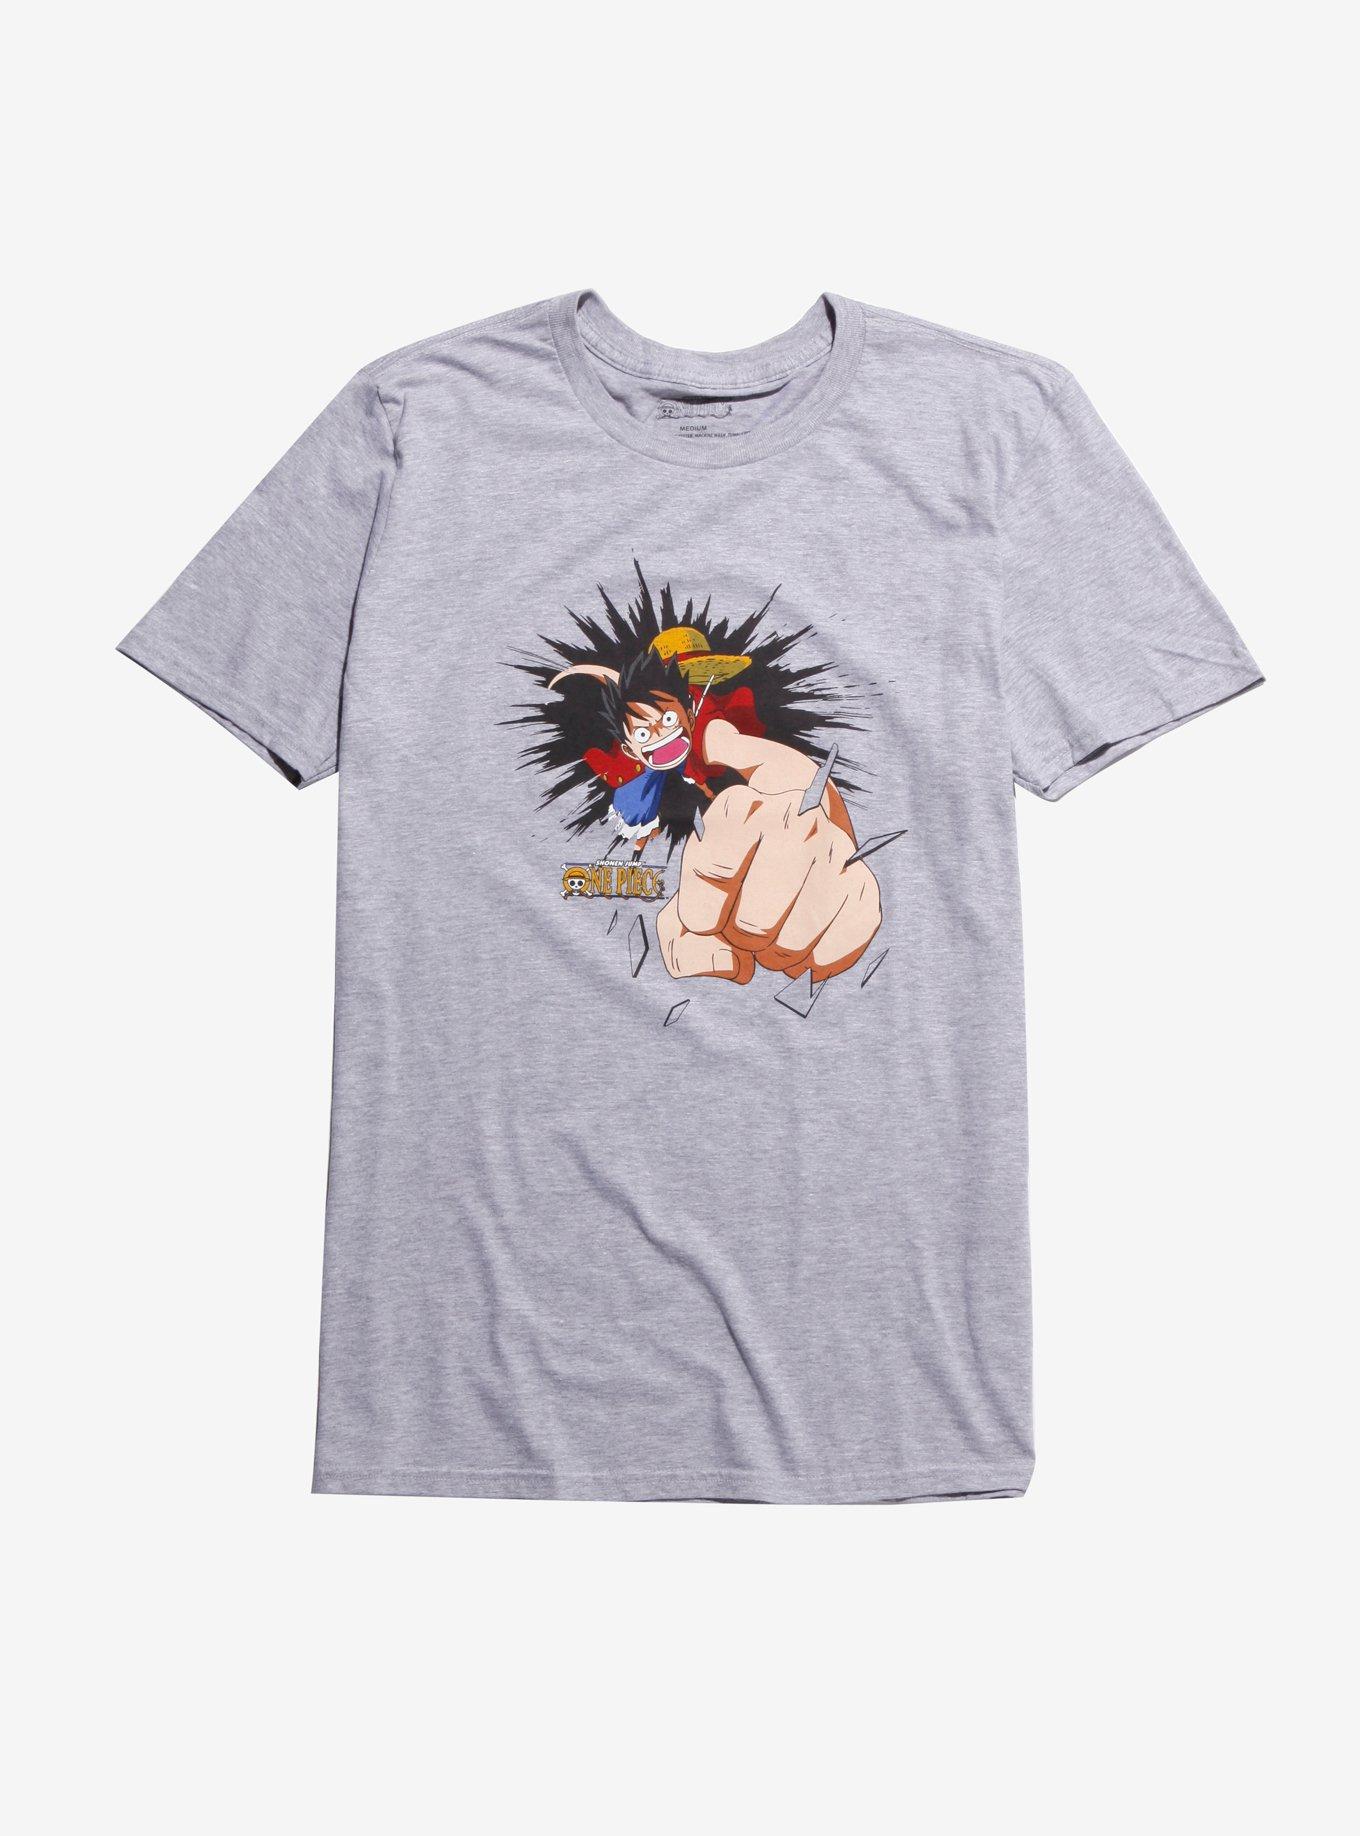 One Piece Luffy Punch T-Shirt, GREY, hi-res